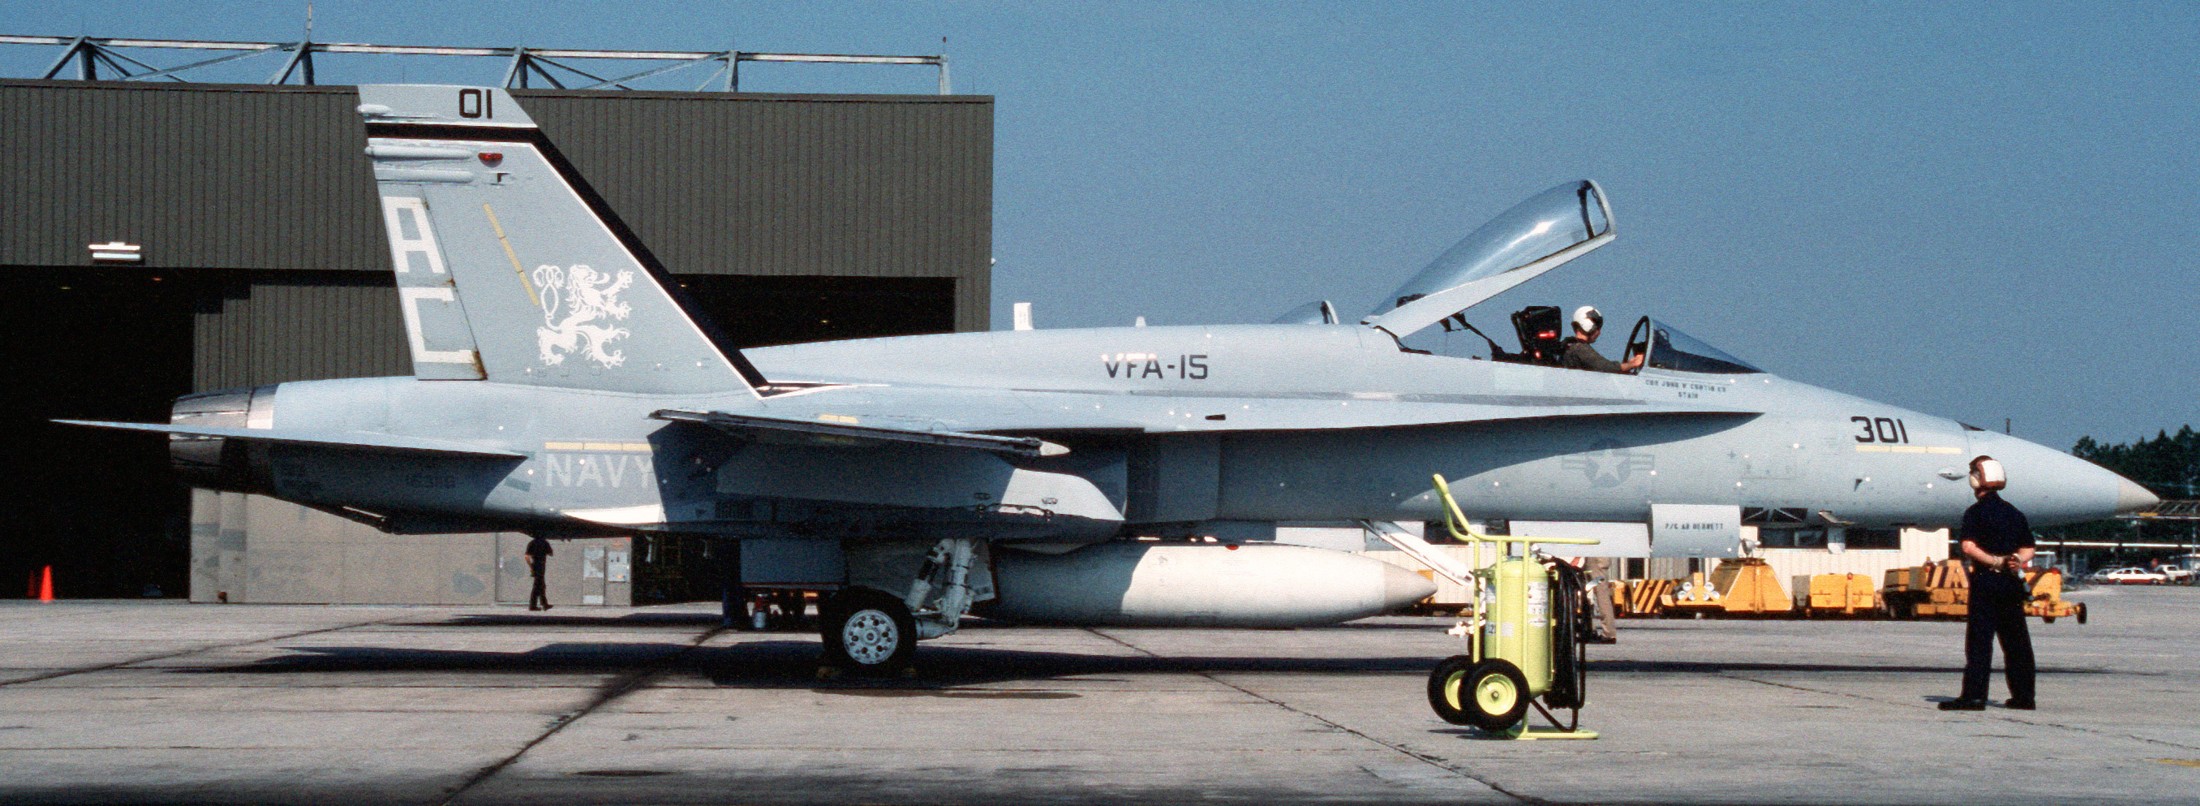 vfa-15 valions strike fighter squadron f/a-18a hornet us navy 110